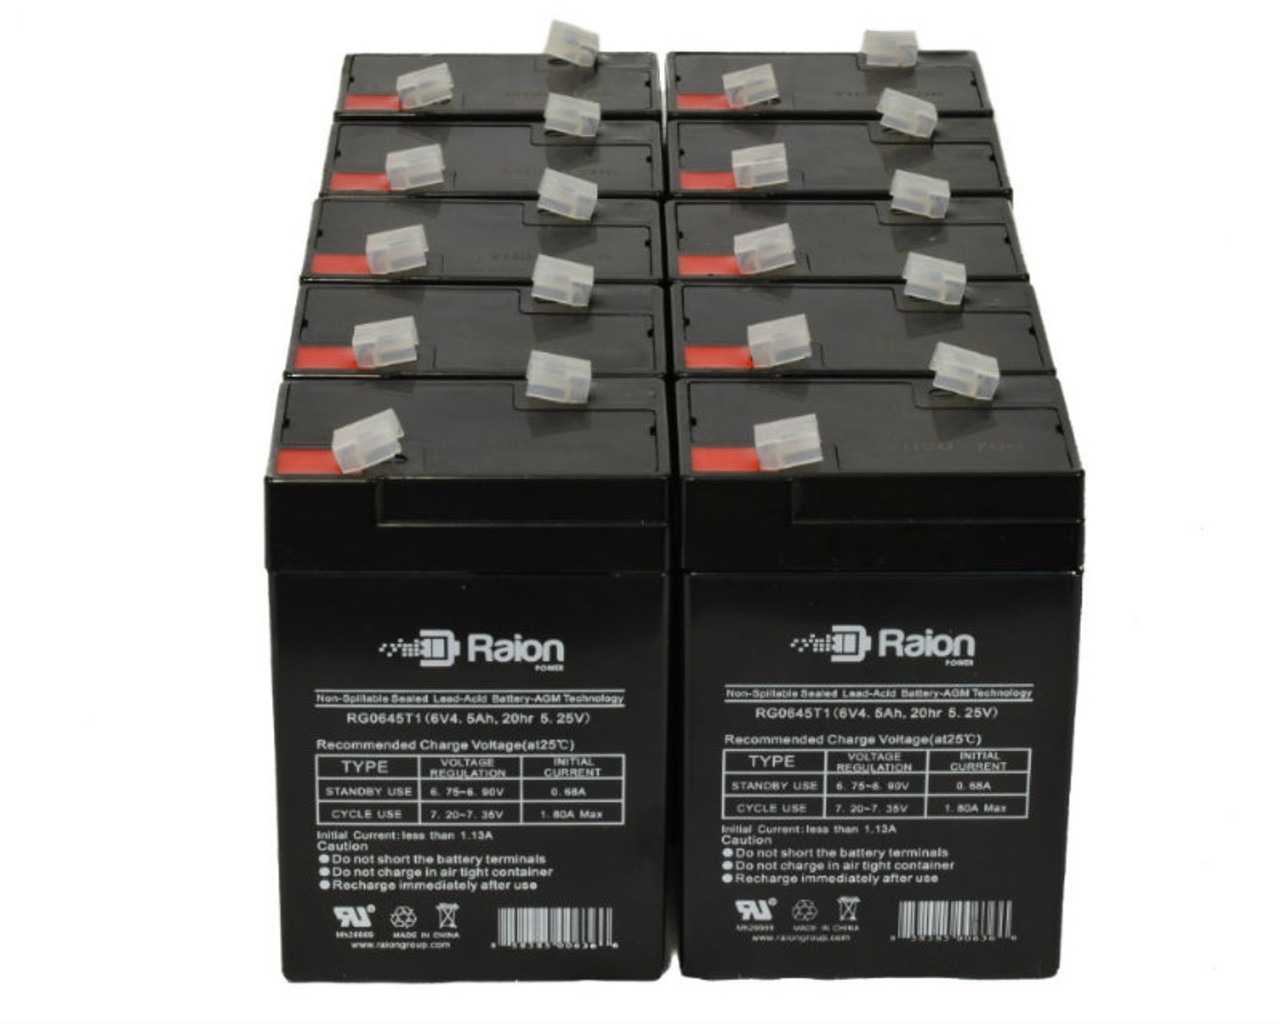 Raion Power 6 Volt 4.5Ah RG0645T1 Replacement Battery for Kweight Power KW 6-4.5 - 10 Pack